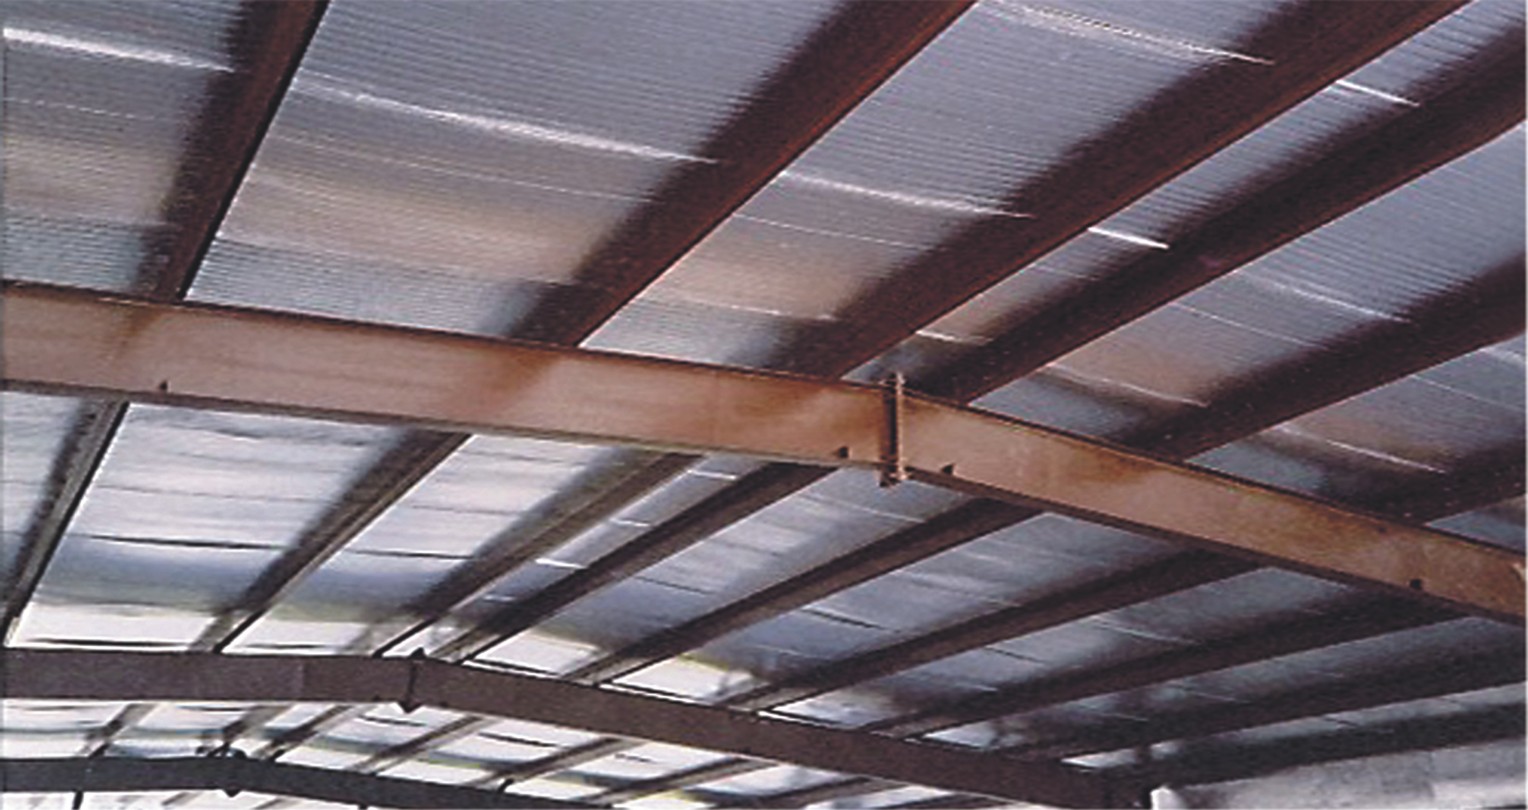 RFOIL Reflective Insulation and Radiant Barriers - Safe, Clean, Effective